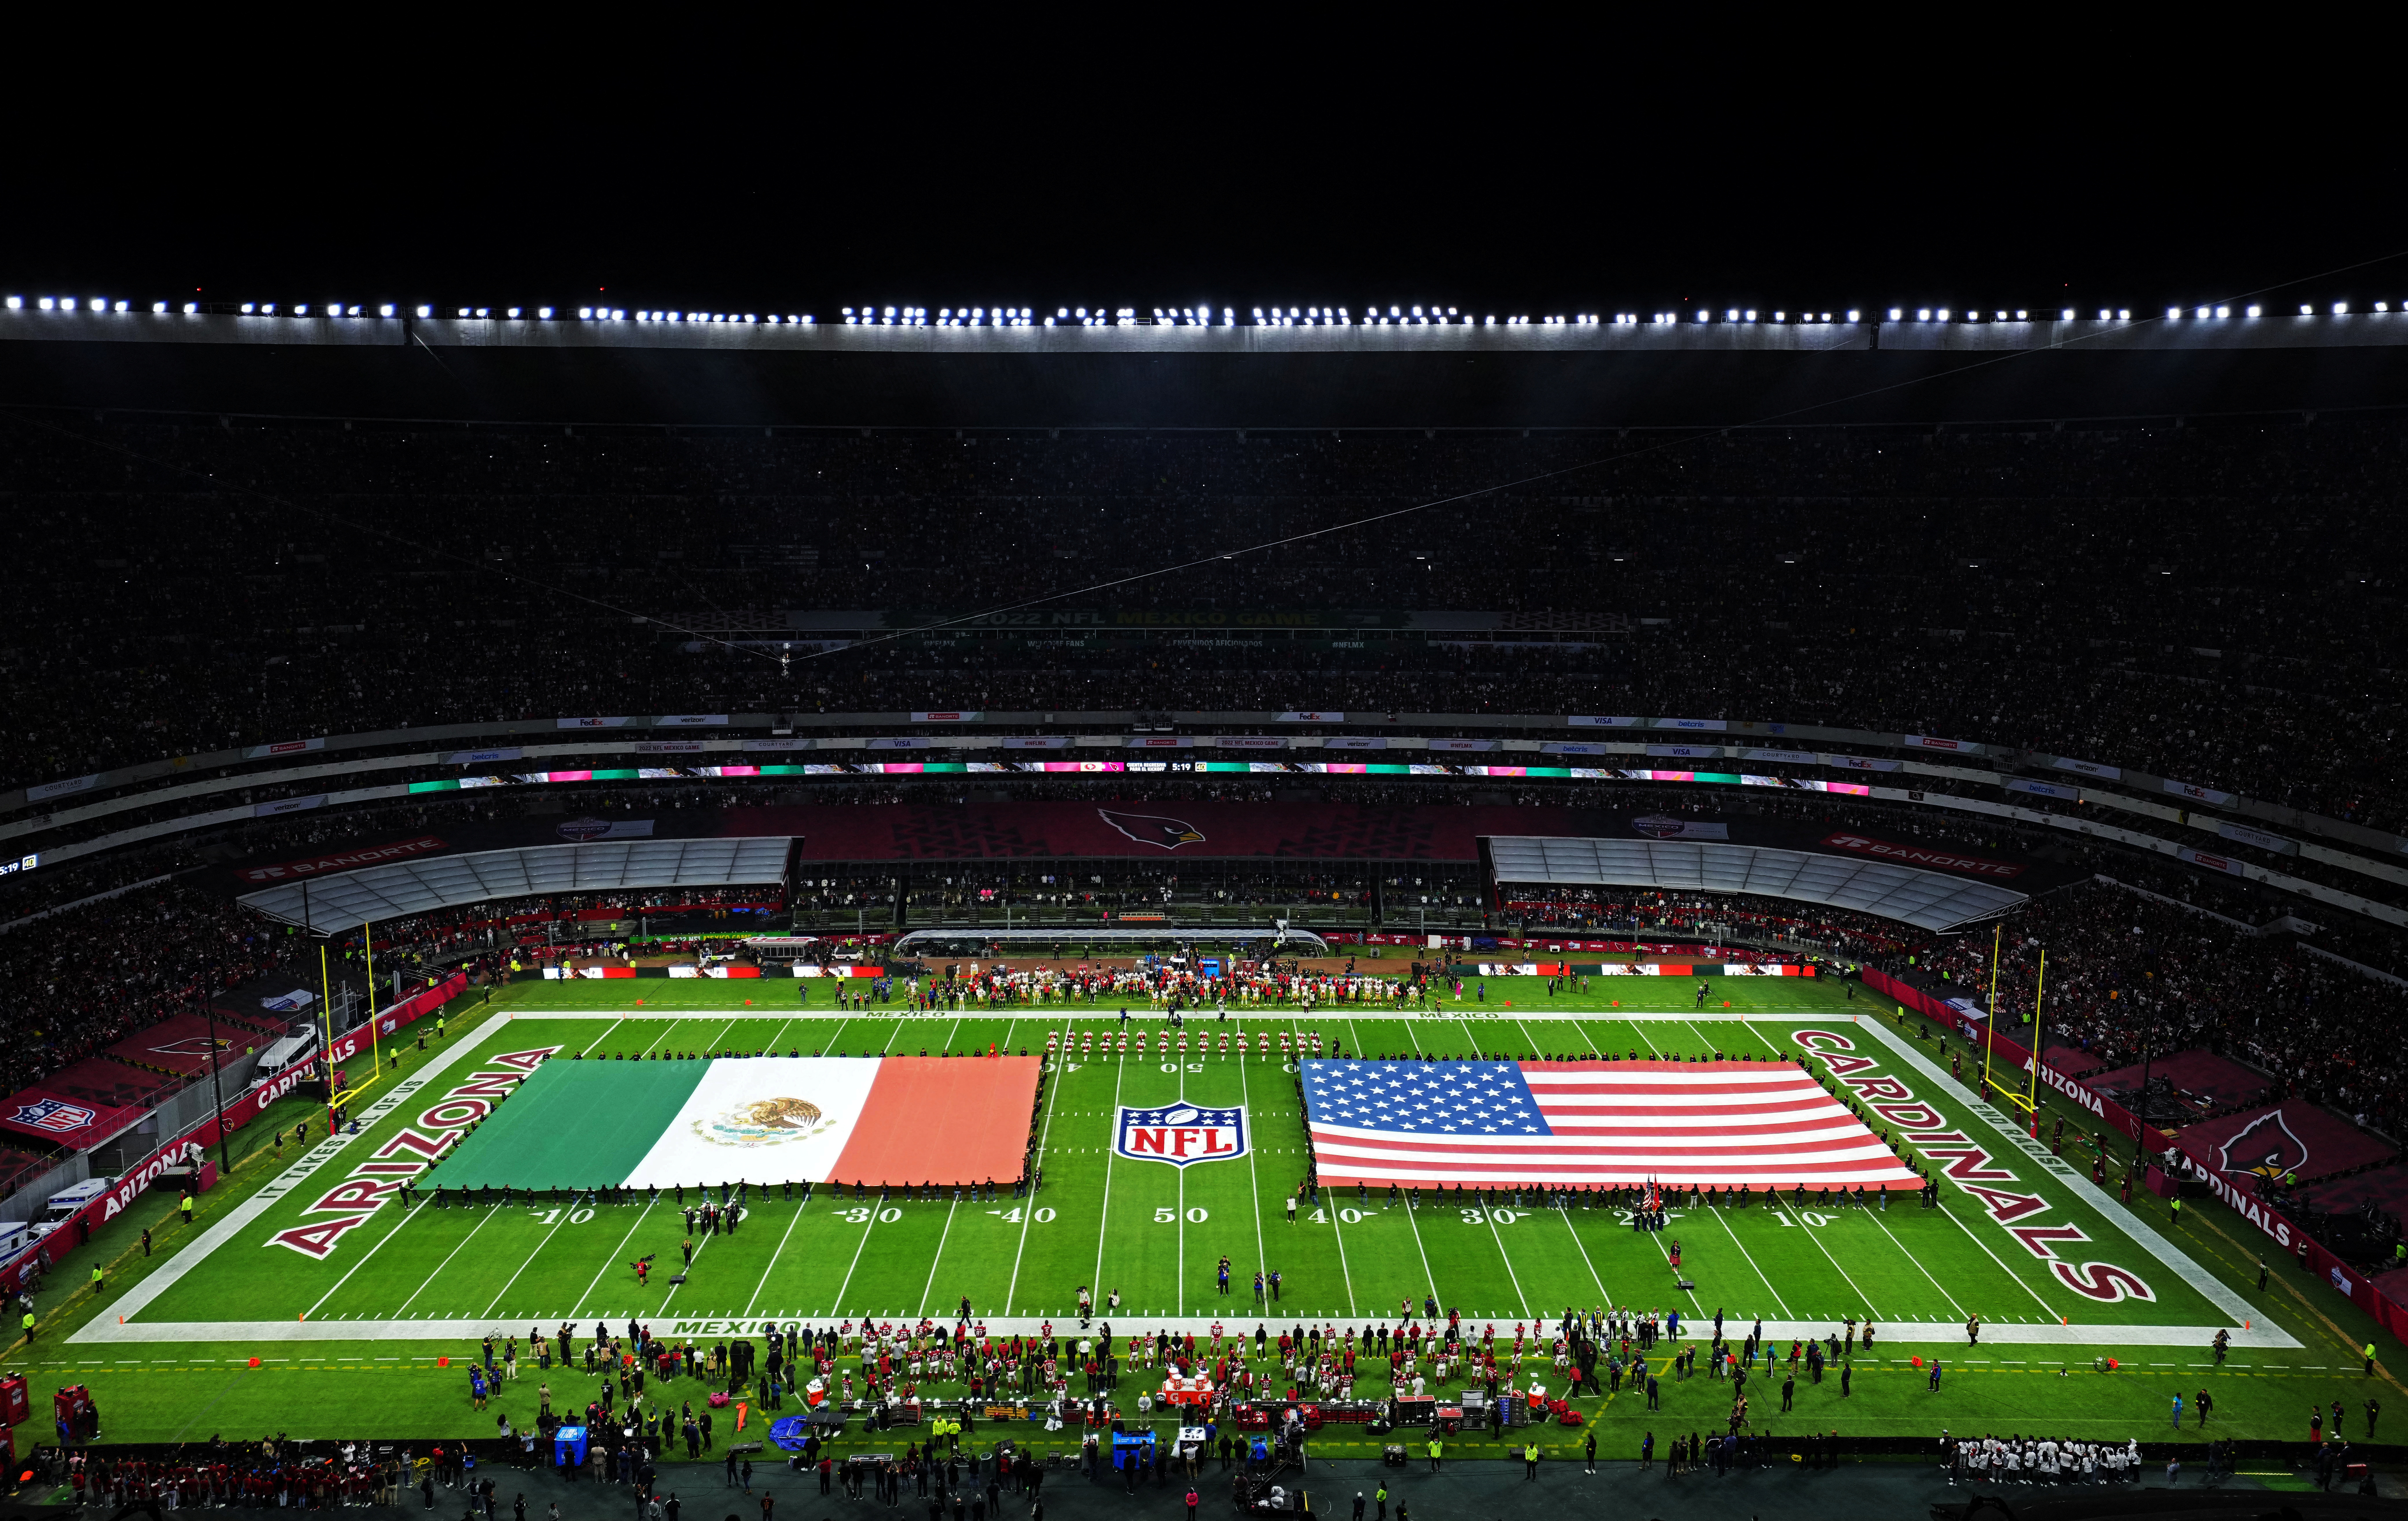 Nov 21, 2022; Mexico City, MEXICO; A general view inside Estadio Azteca as the national anthems are played prior to the Monday Night Football game between the Arizona Cardinals and the San Francisco 49ers. Mandatory Credit: Kirby Lee-USA TODAY Sports     TPX IMAGES OF THE DAY